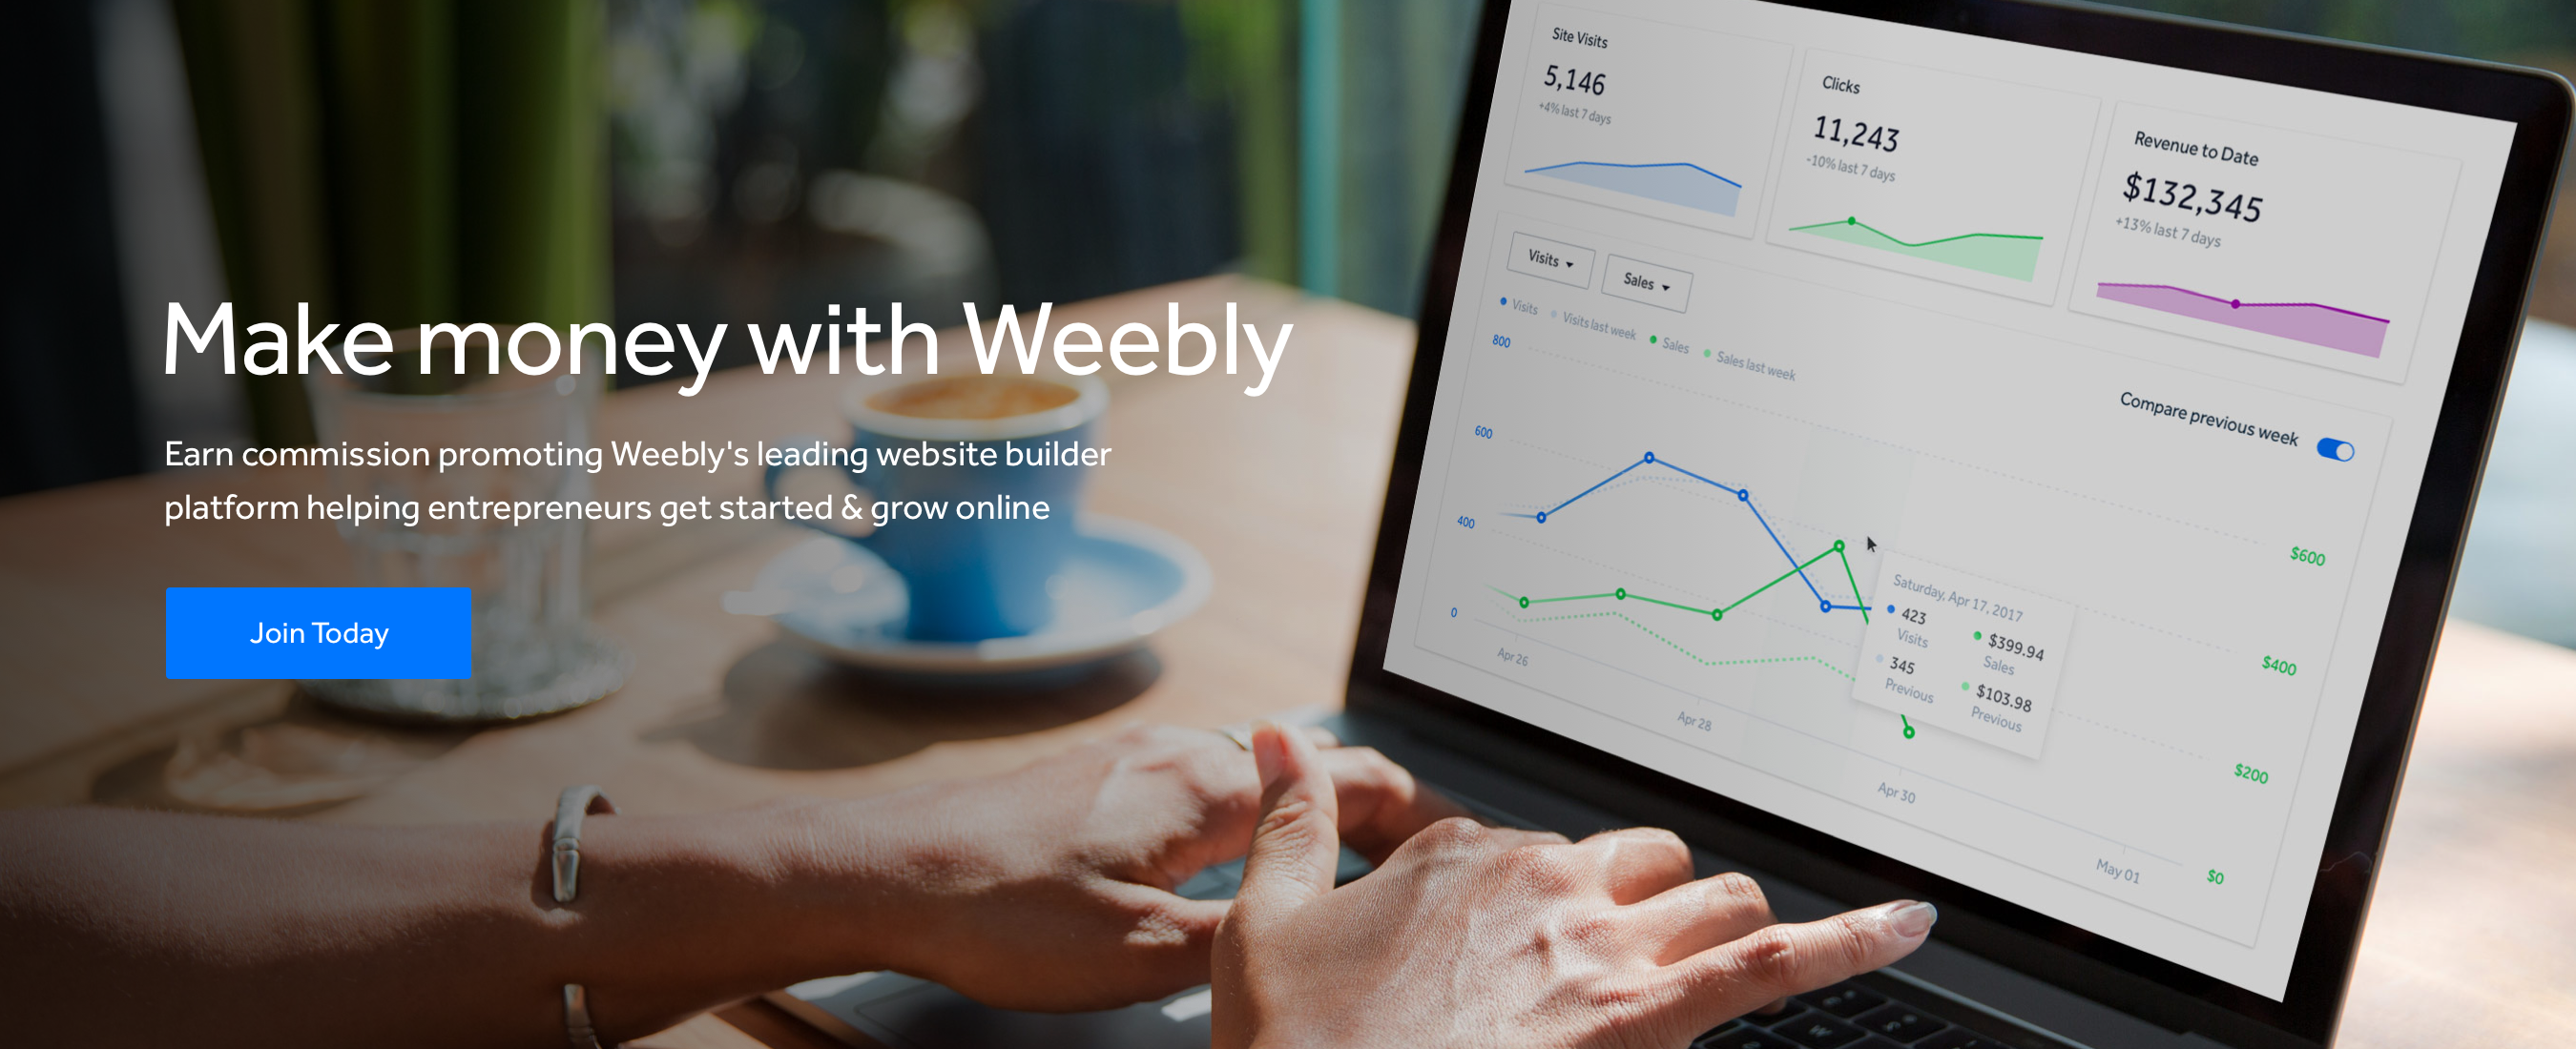 Make Money With Weebly! Join the Weebly Affiliate Program Today!